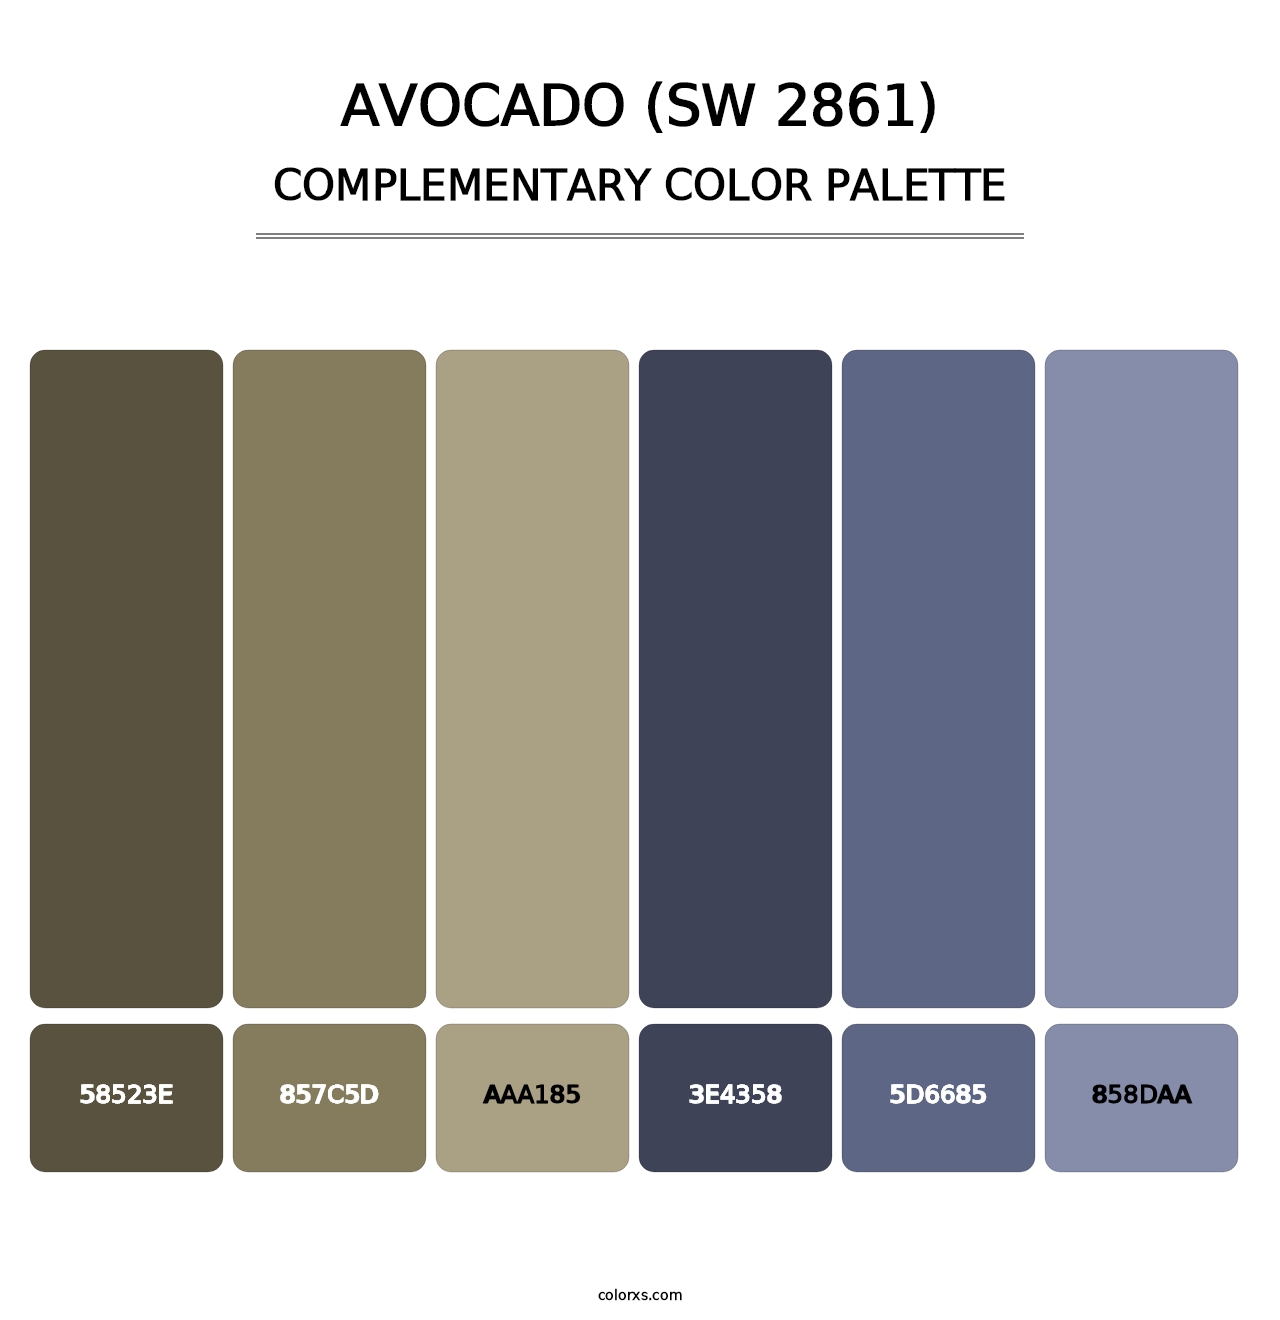 Avocado (SW 2861) - Complementary Color Palette